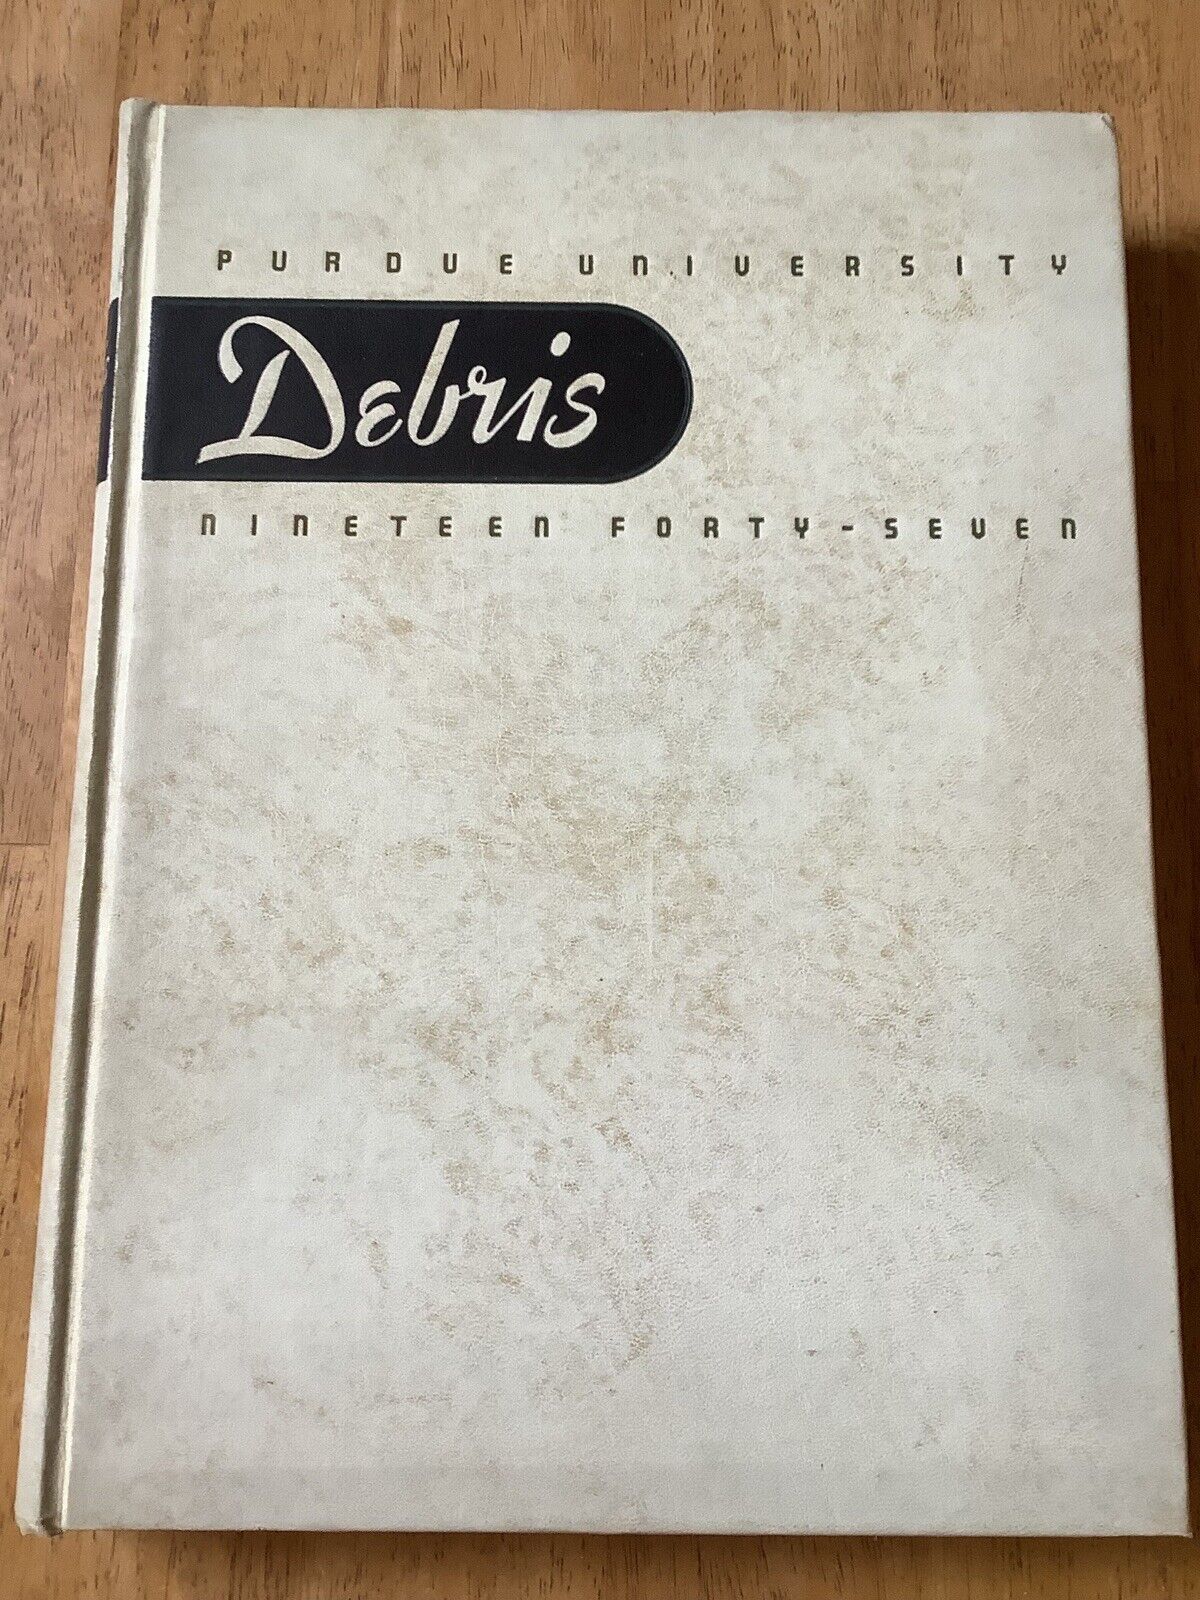 1947 Perdue University Yearbook “ Debris “ Hardcover 485 Pages 12 1/ 2” x 9 1/2”